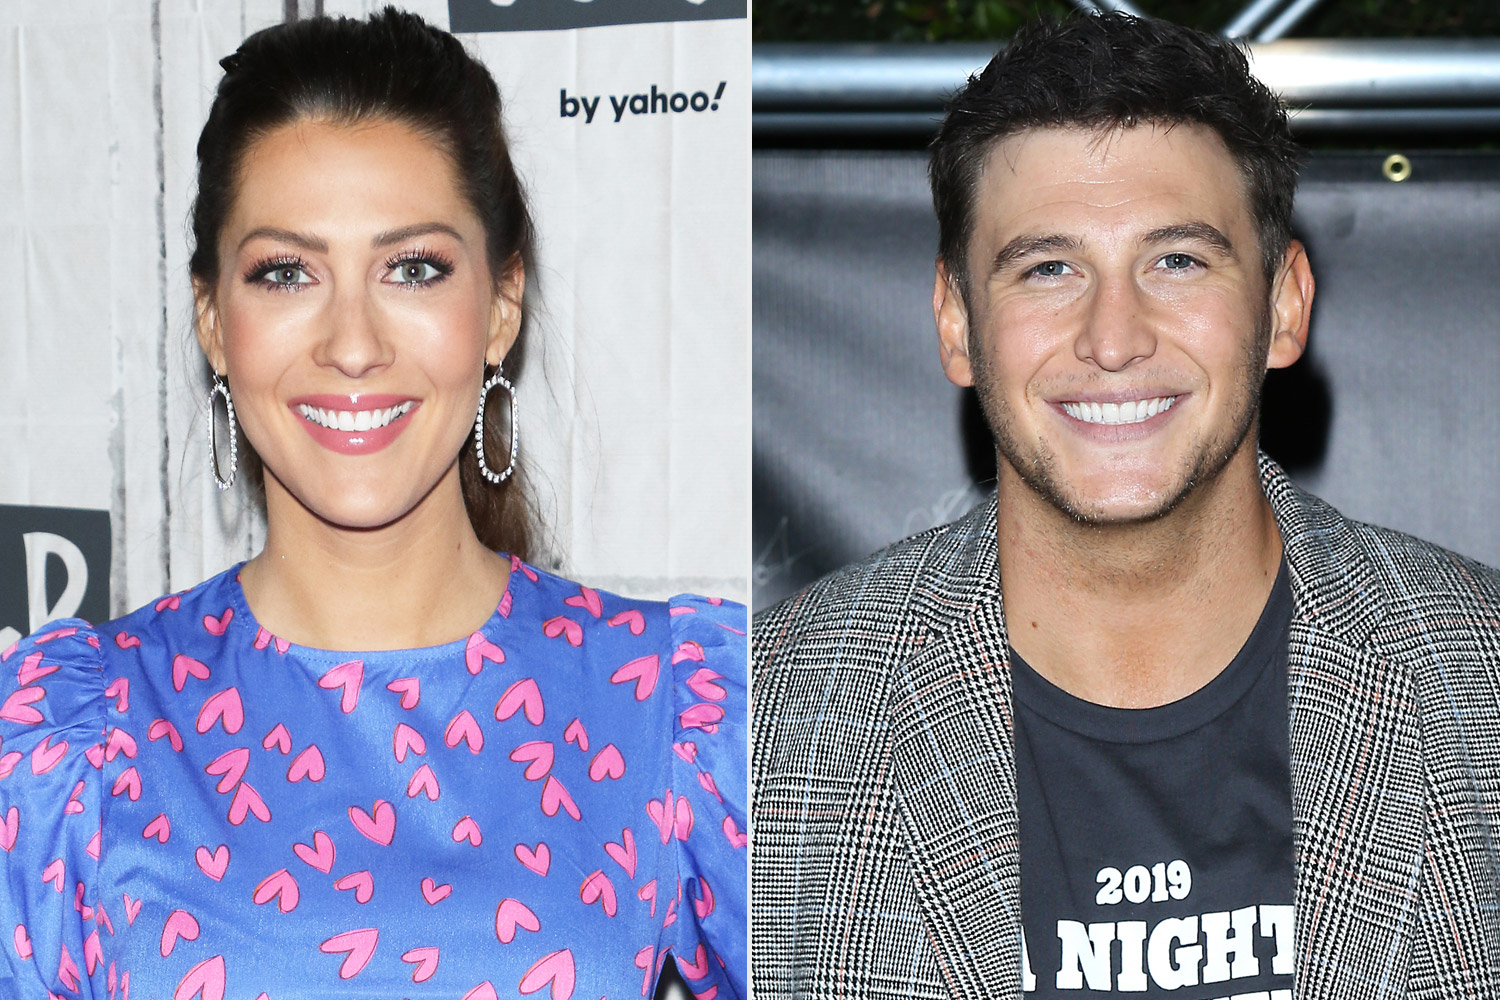 Becca Kufrin Says 'Nothing Romantic' Happened with Ex Blake Horstmann Before She Joined BiP